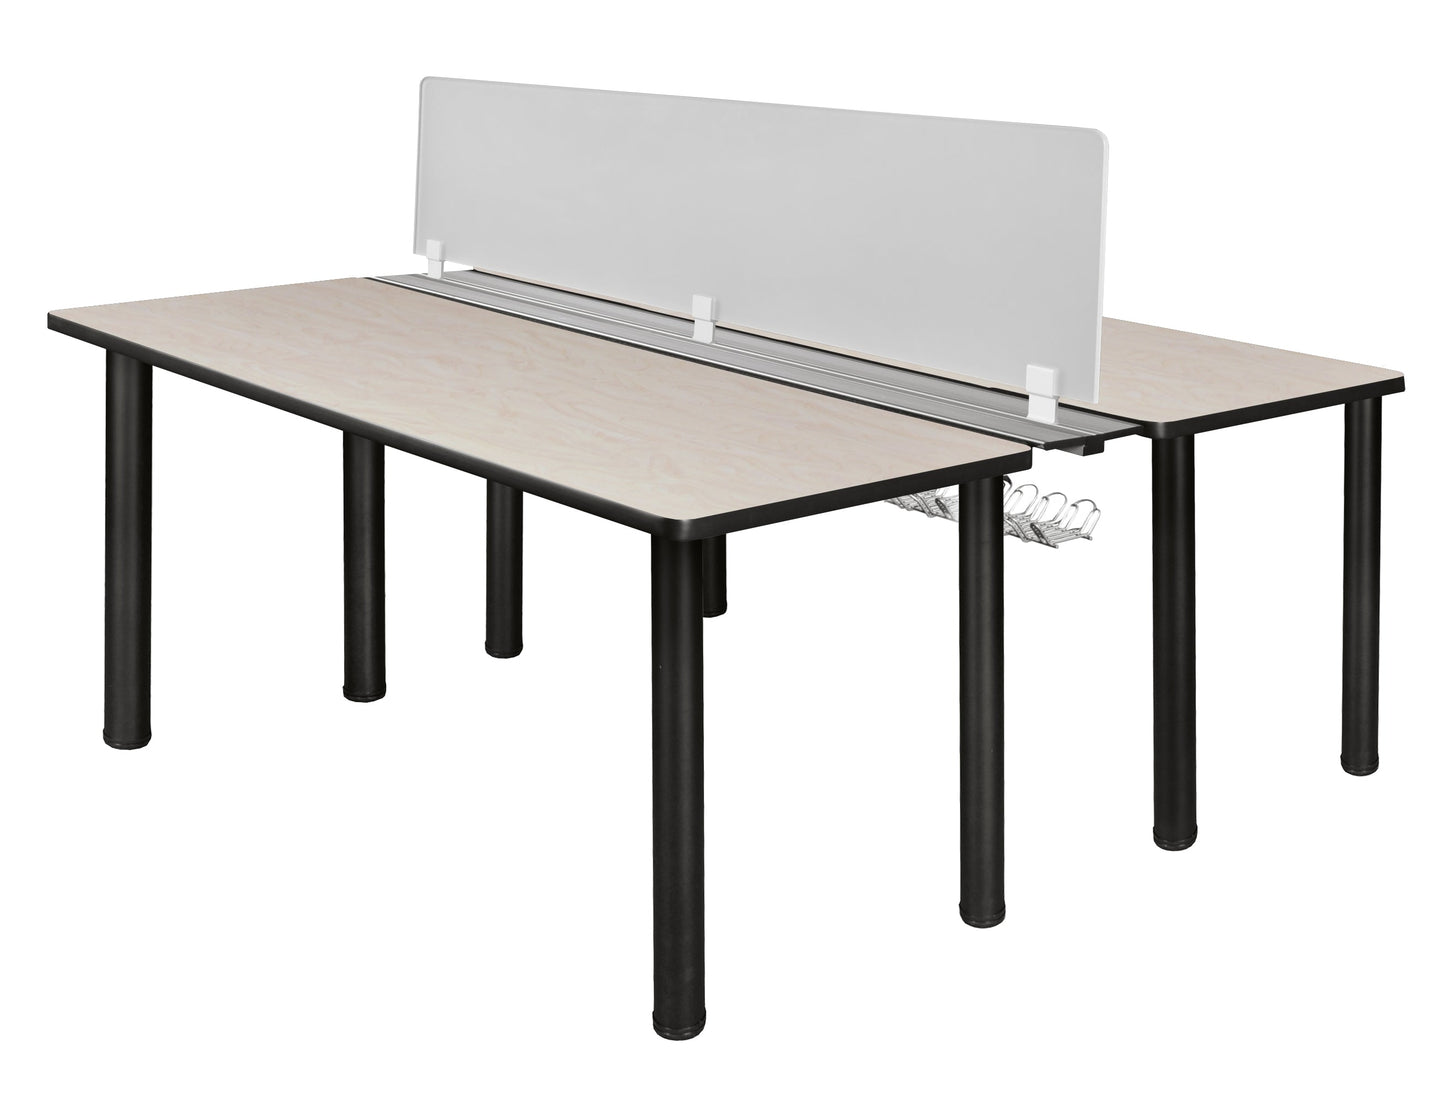 Regency Kee 2 Person Workstation Desk with Privacy Divider (66"W x 58"D)